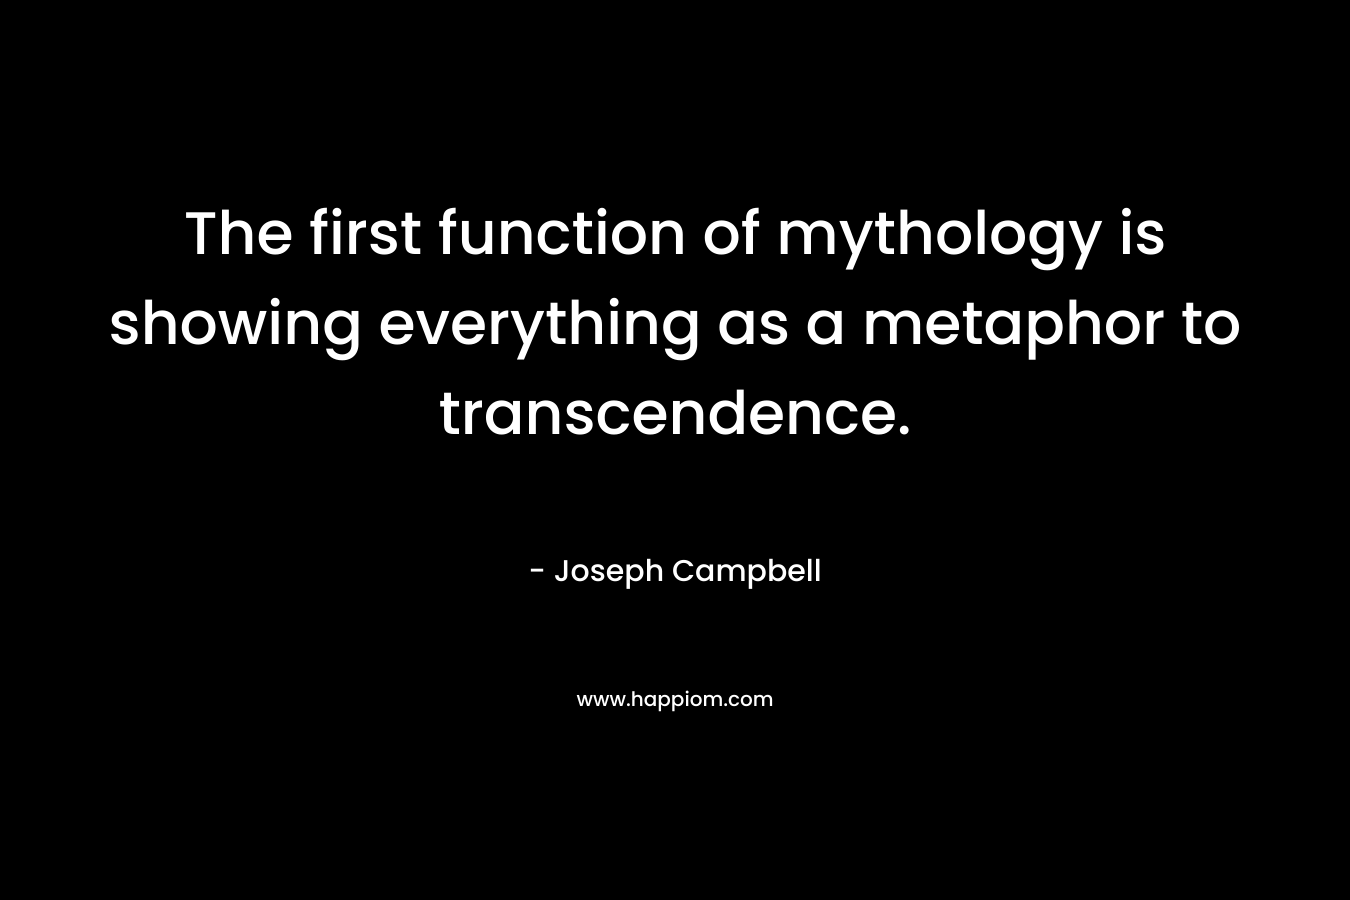 The first function of mythology is showing everything as a metaphor to transcendence. – Joseph Campbell